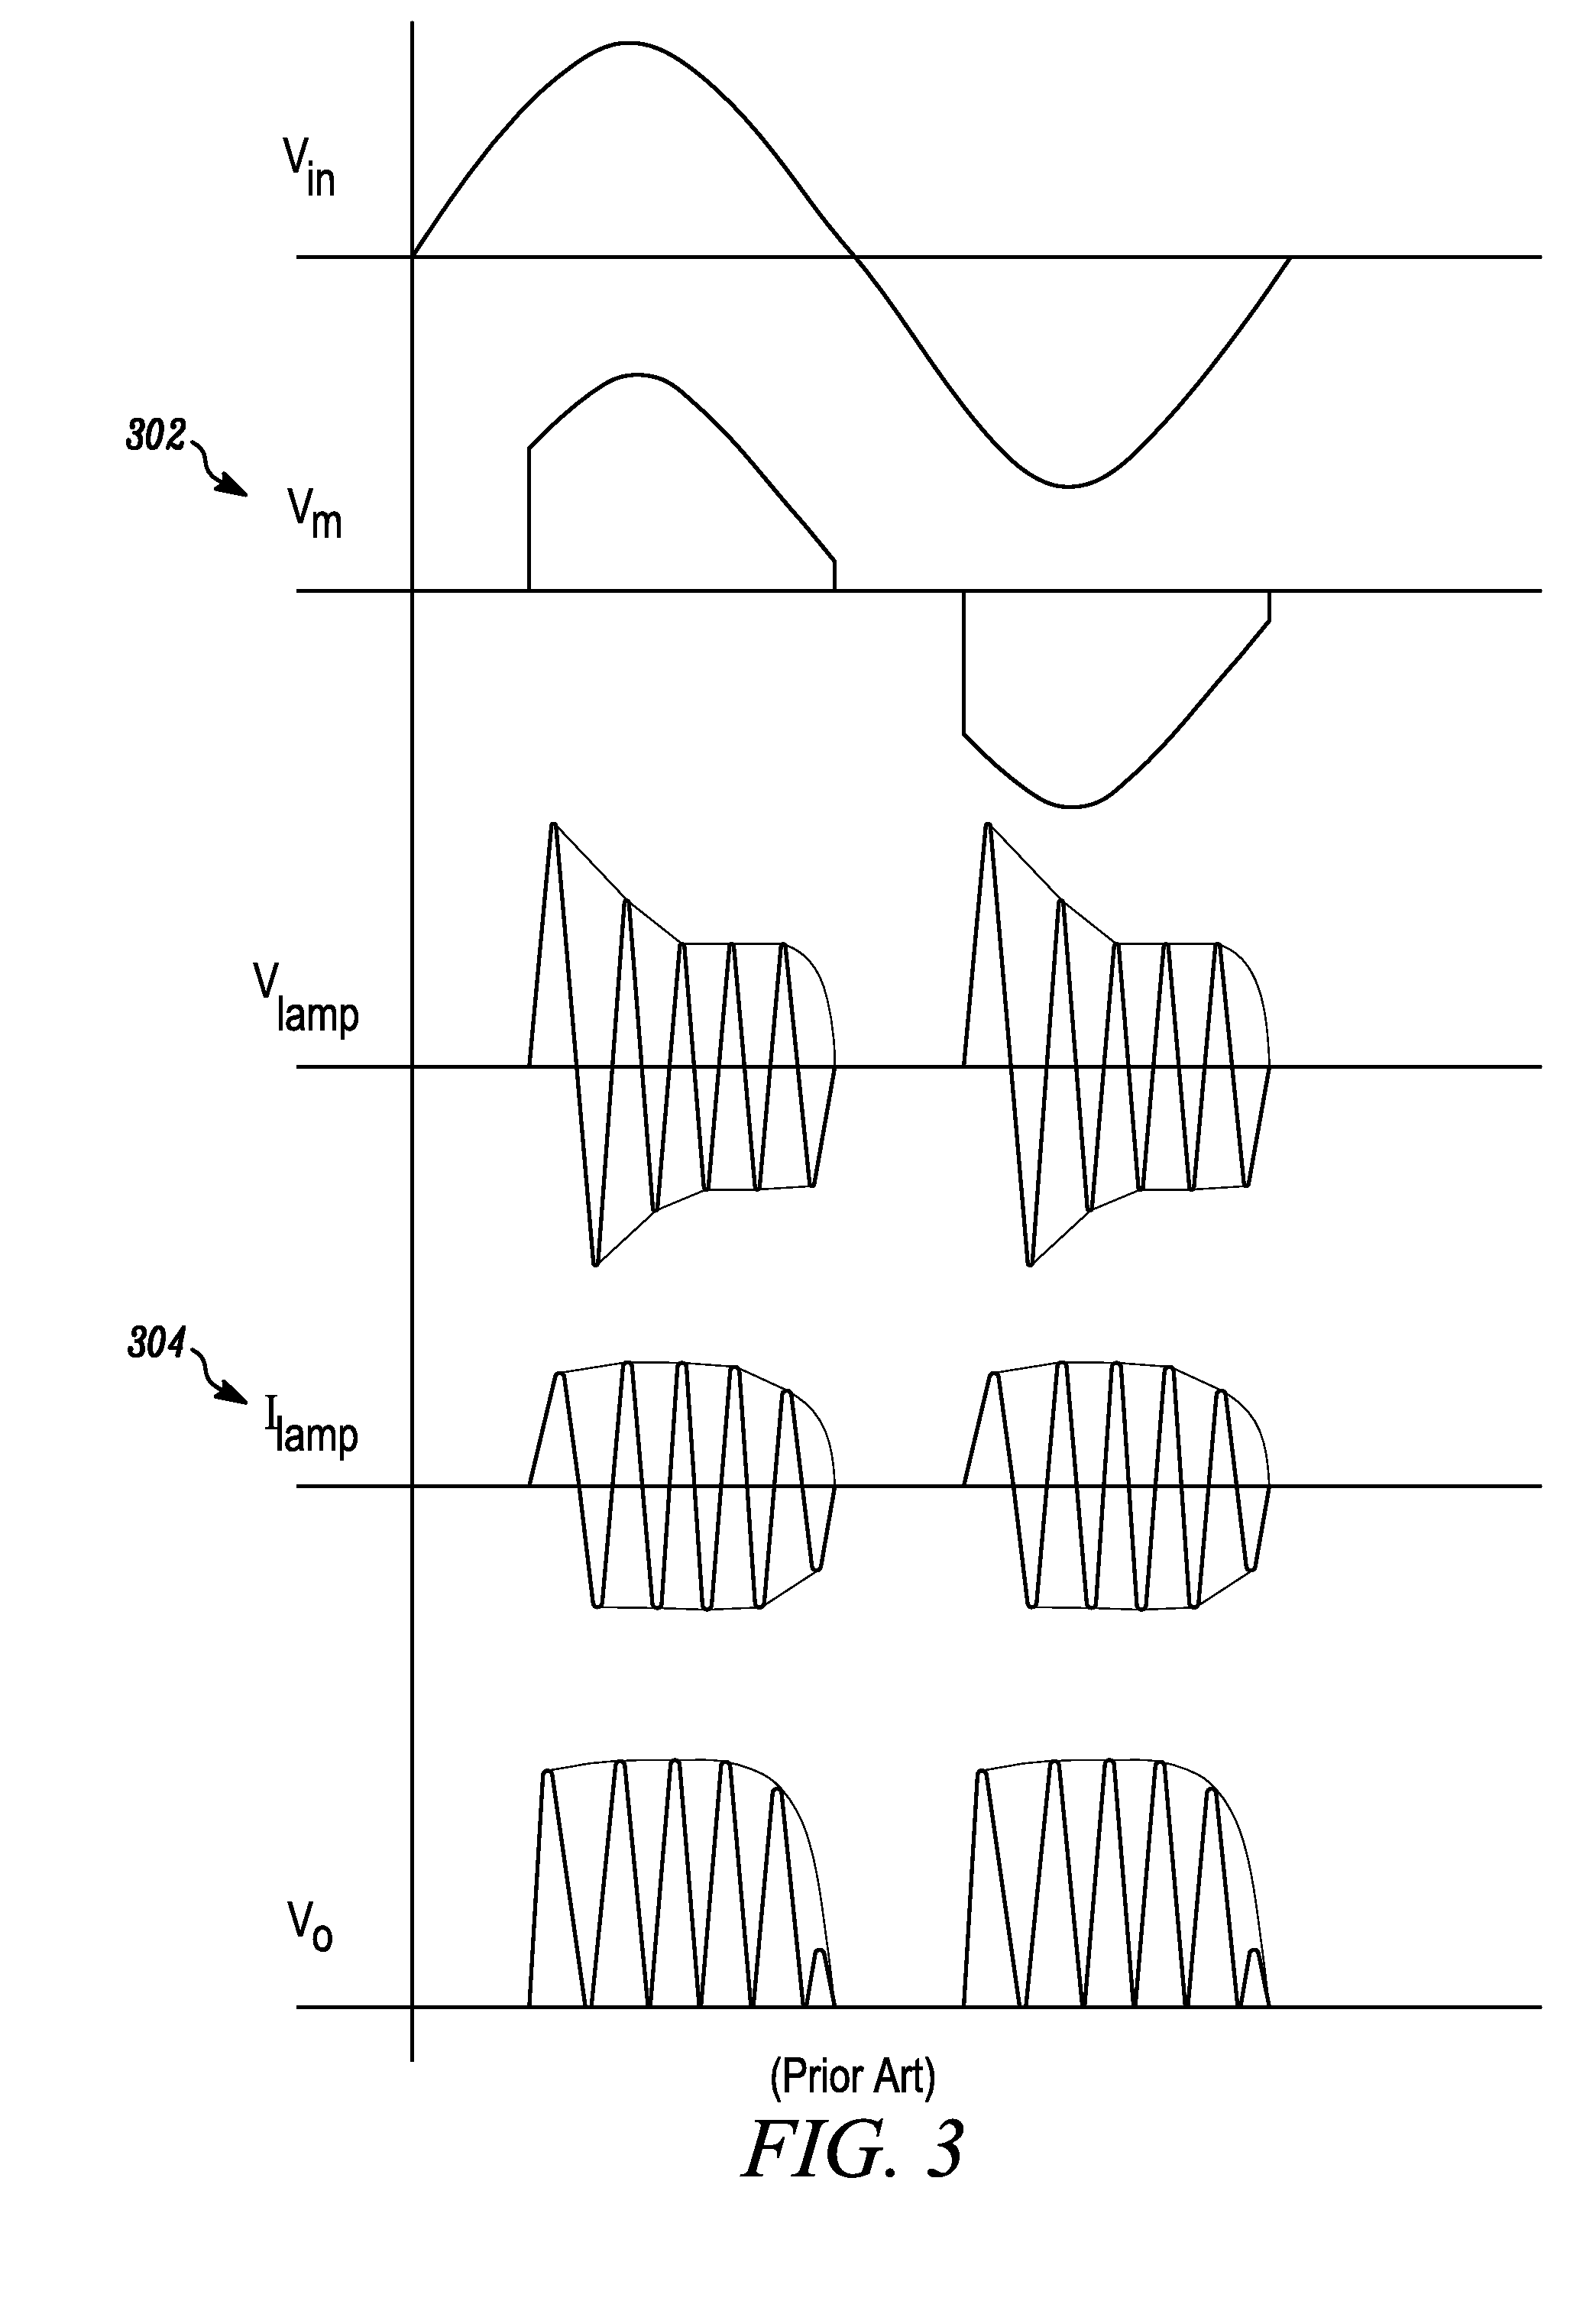 Arrangements and methods for triac dimming of gas discharge lamps powered by electronic ballasts